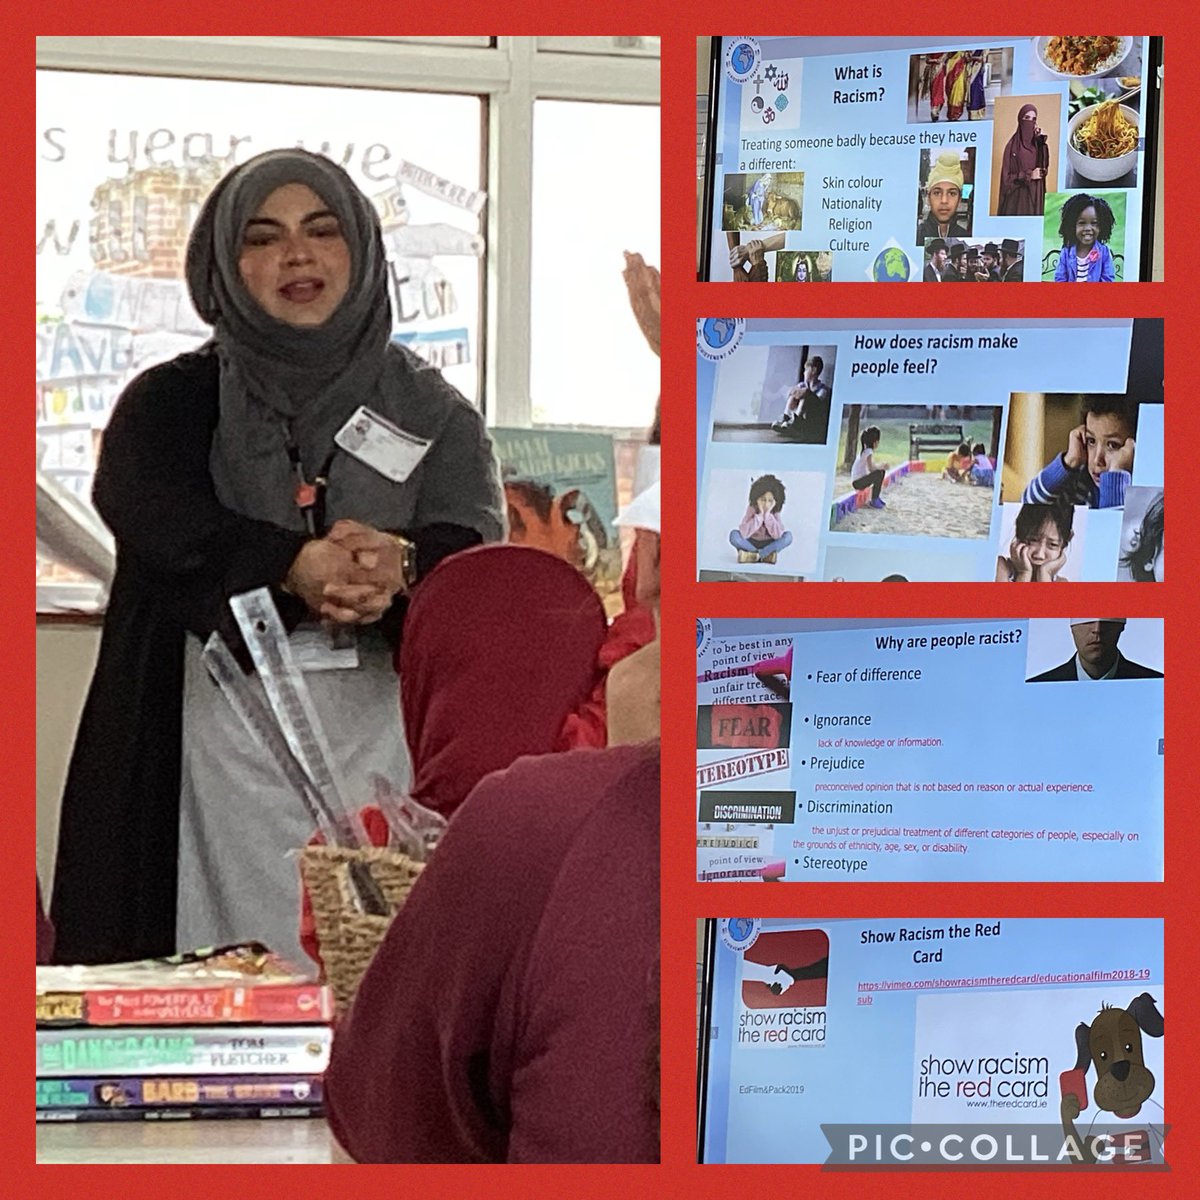 Year 5 really enjoyed listening to Sheema this morning and learning about how it is important to be antiracist and what we can do to make a difference in the world 🌍